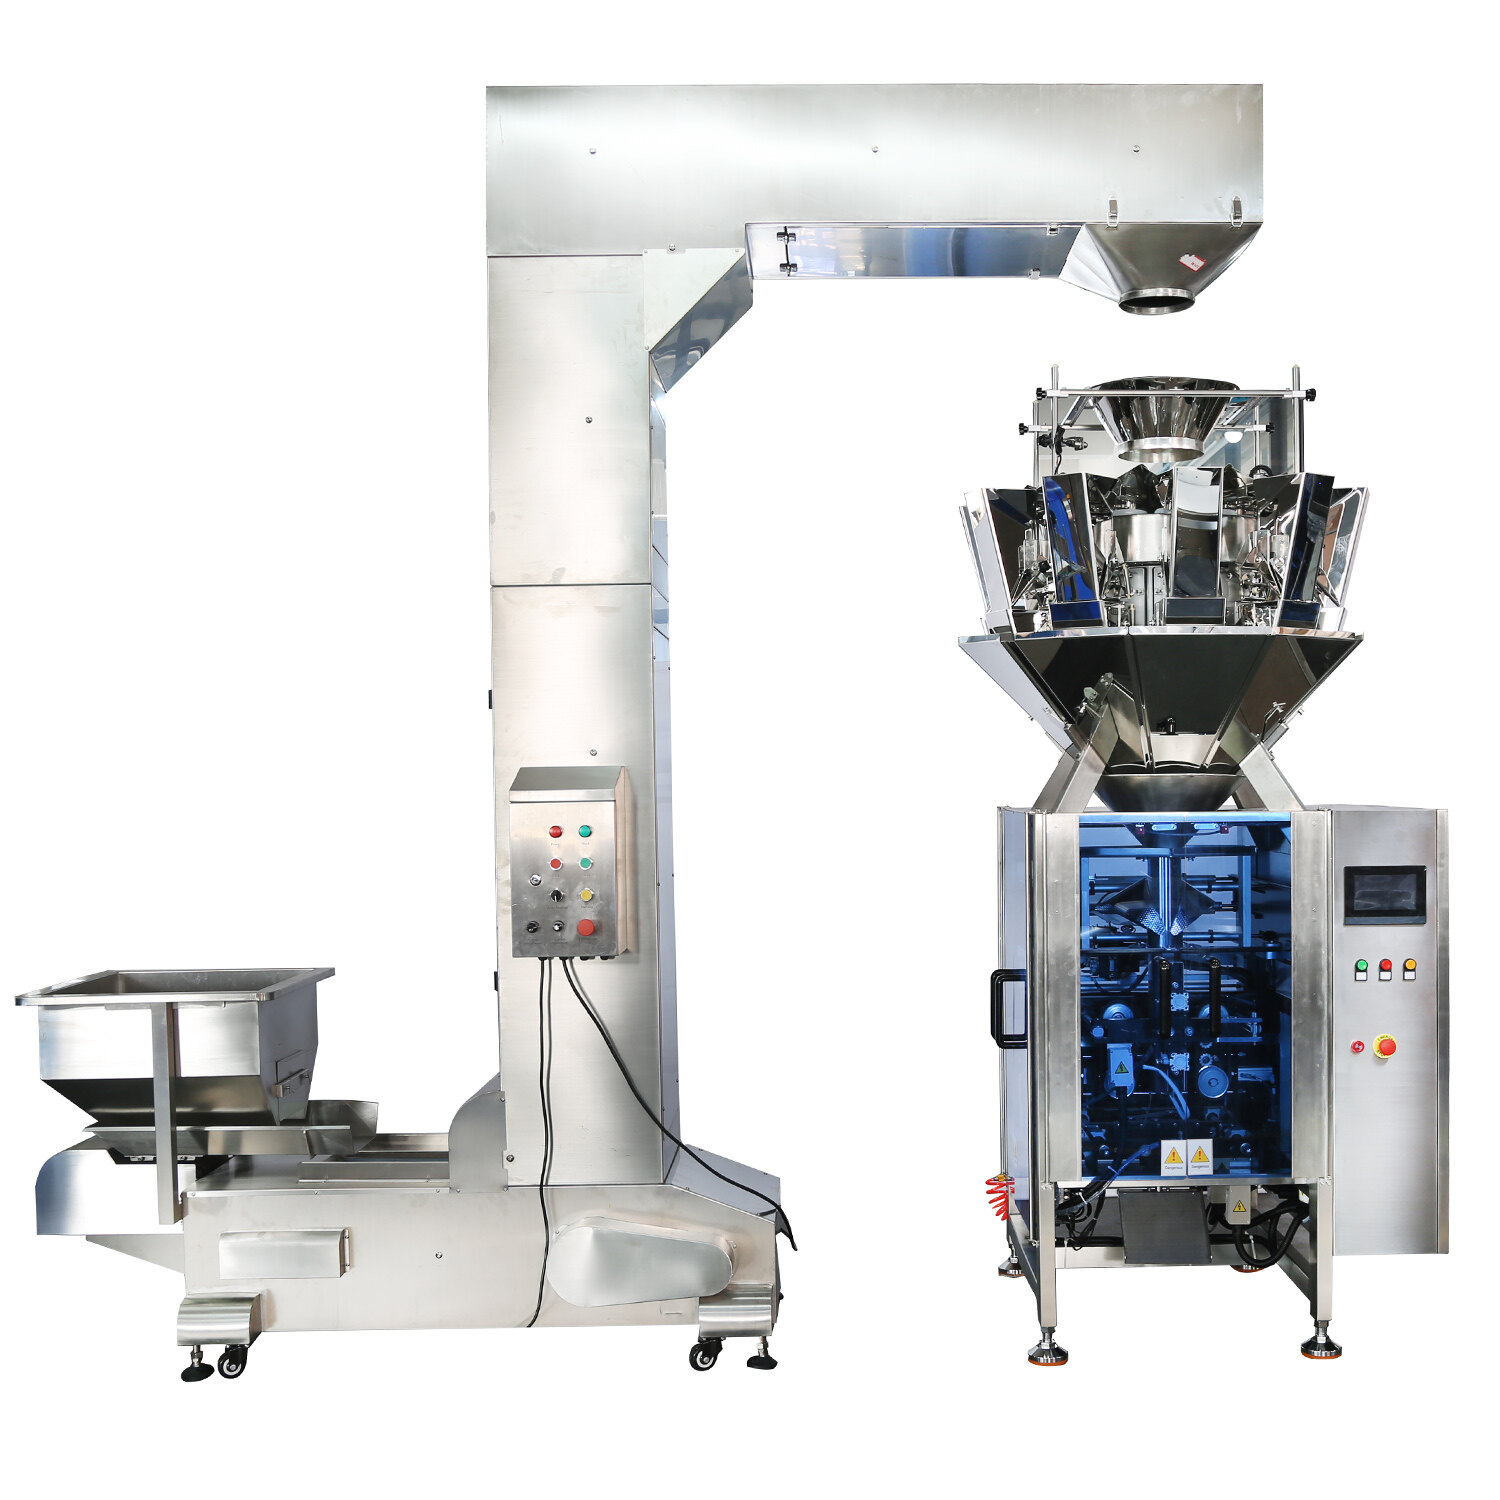 WP-EC series weighing and packing 2 in 1 machine